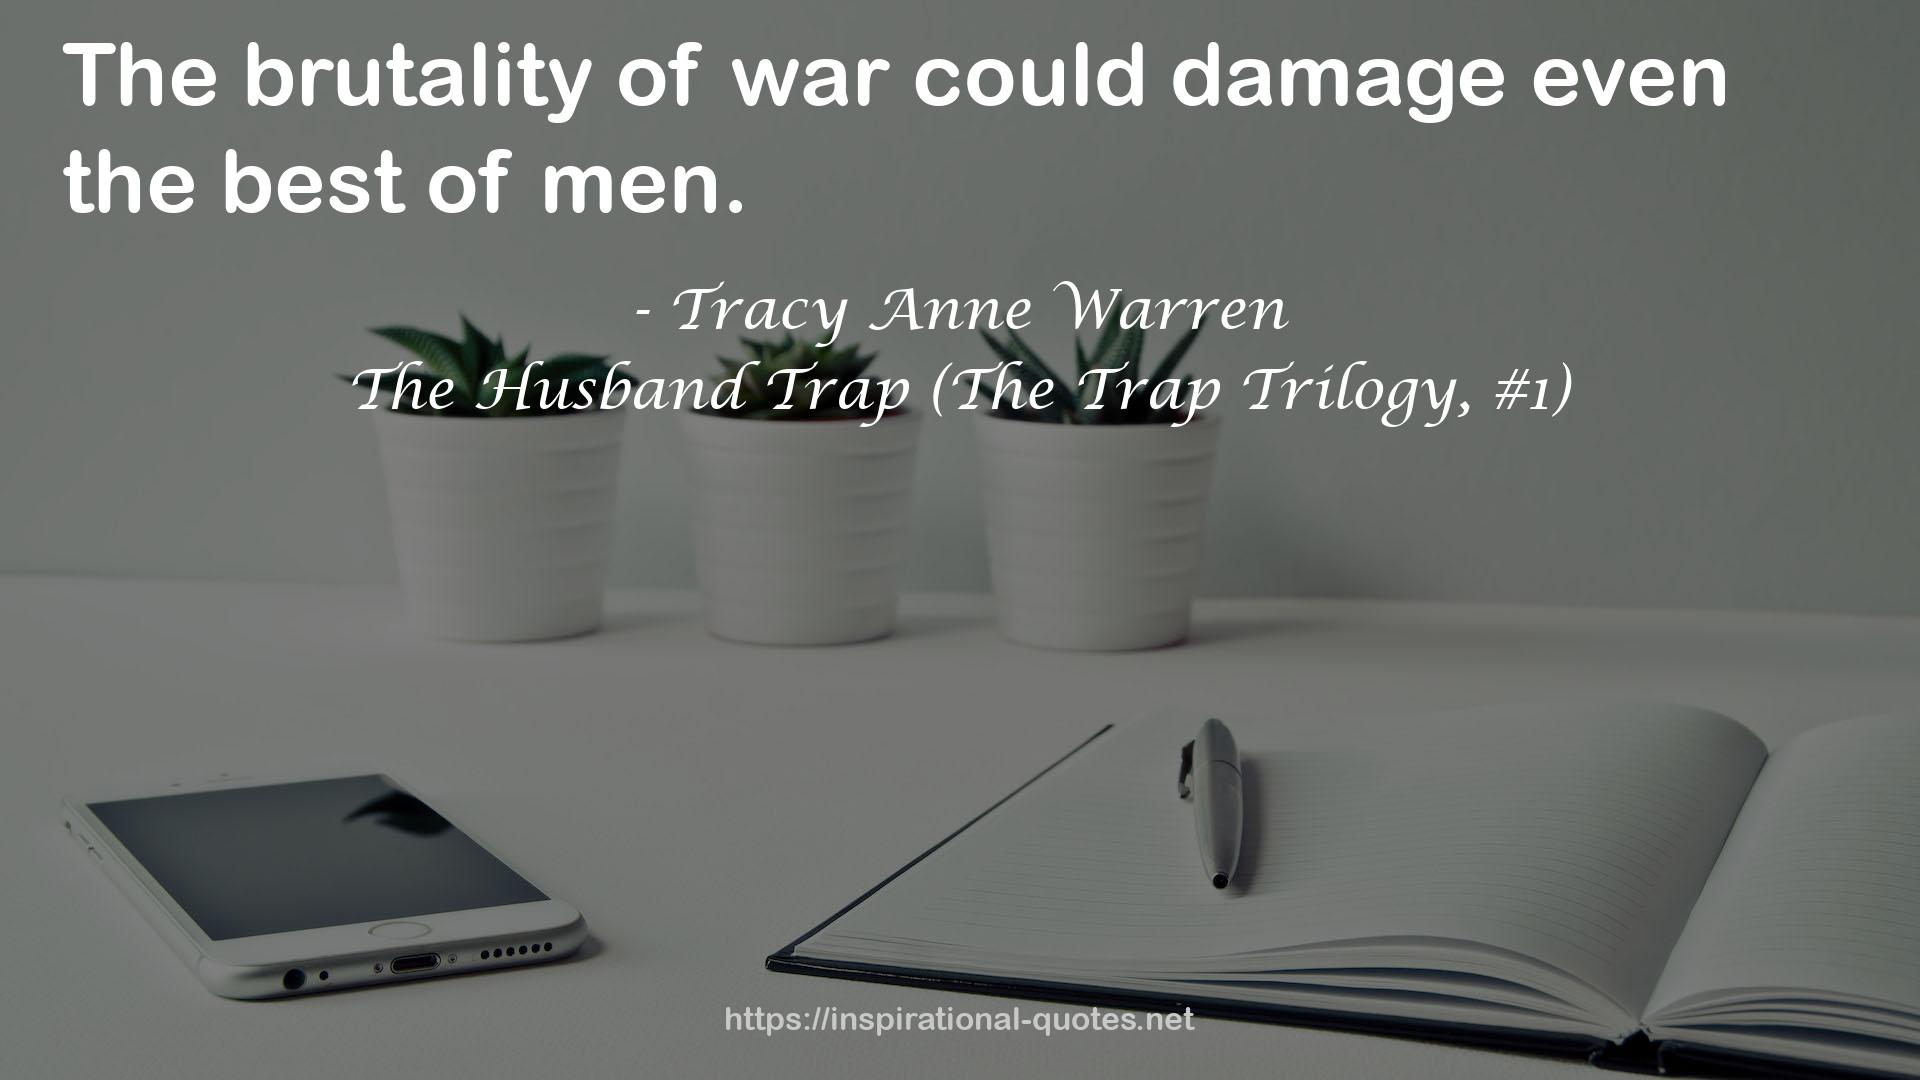 The Husband Trap (The Trap Trilogy, #1) QUOTES